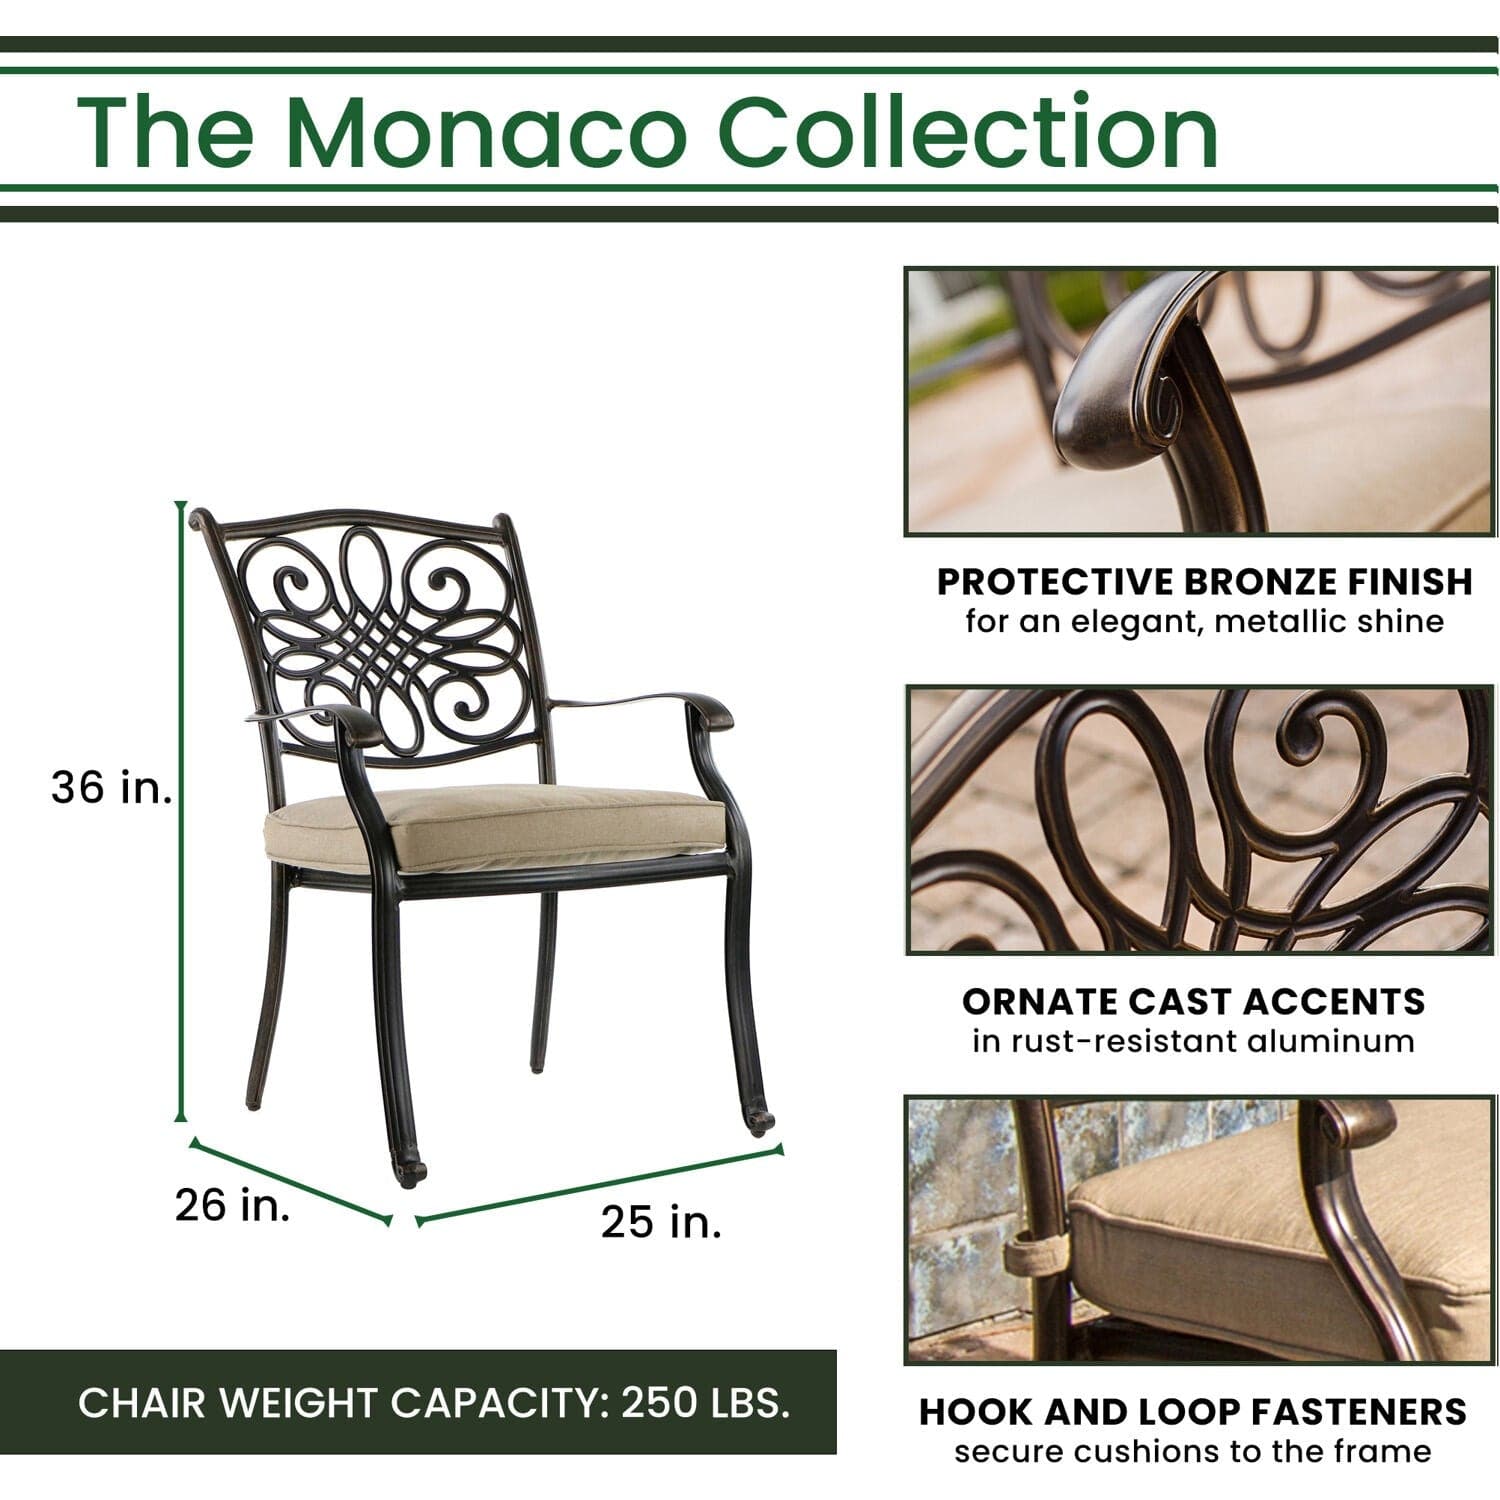 Hanover Outdoor Dining Set Hanover Monaco 7-Piece Dining Set in Tan with Six Dining Chairs and a 60-in. Tile-Top Table | MONDN7PCRDTL-C-TAN